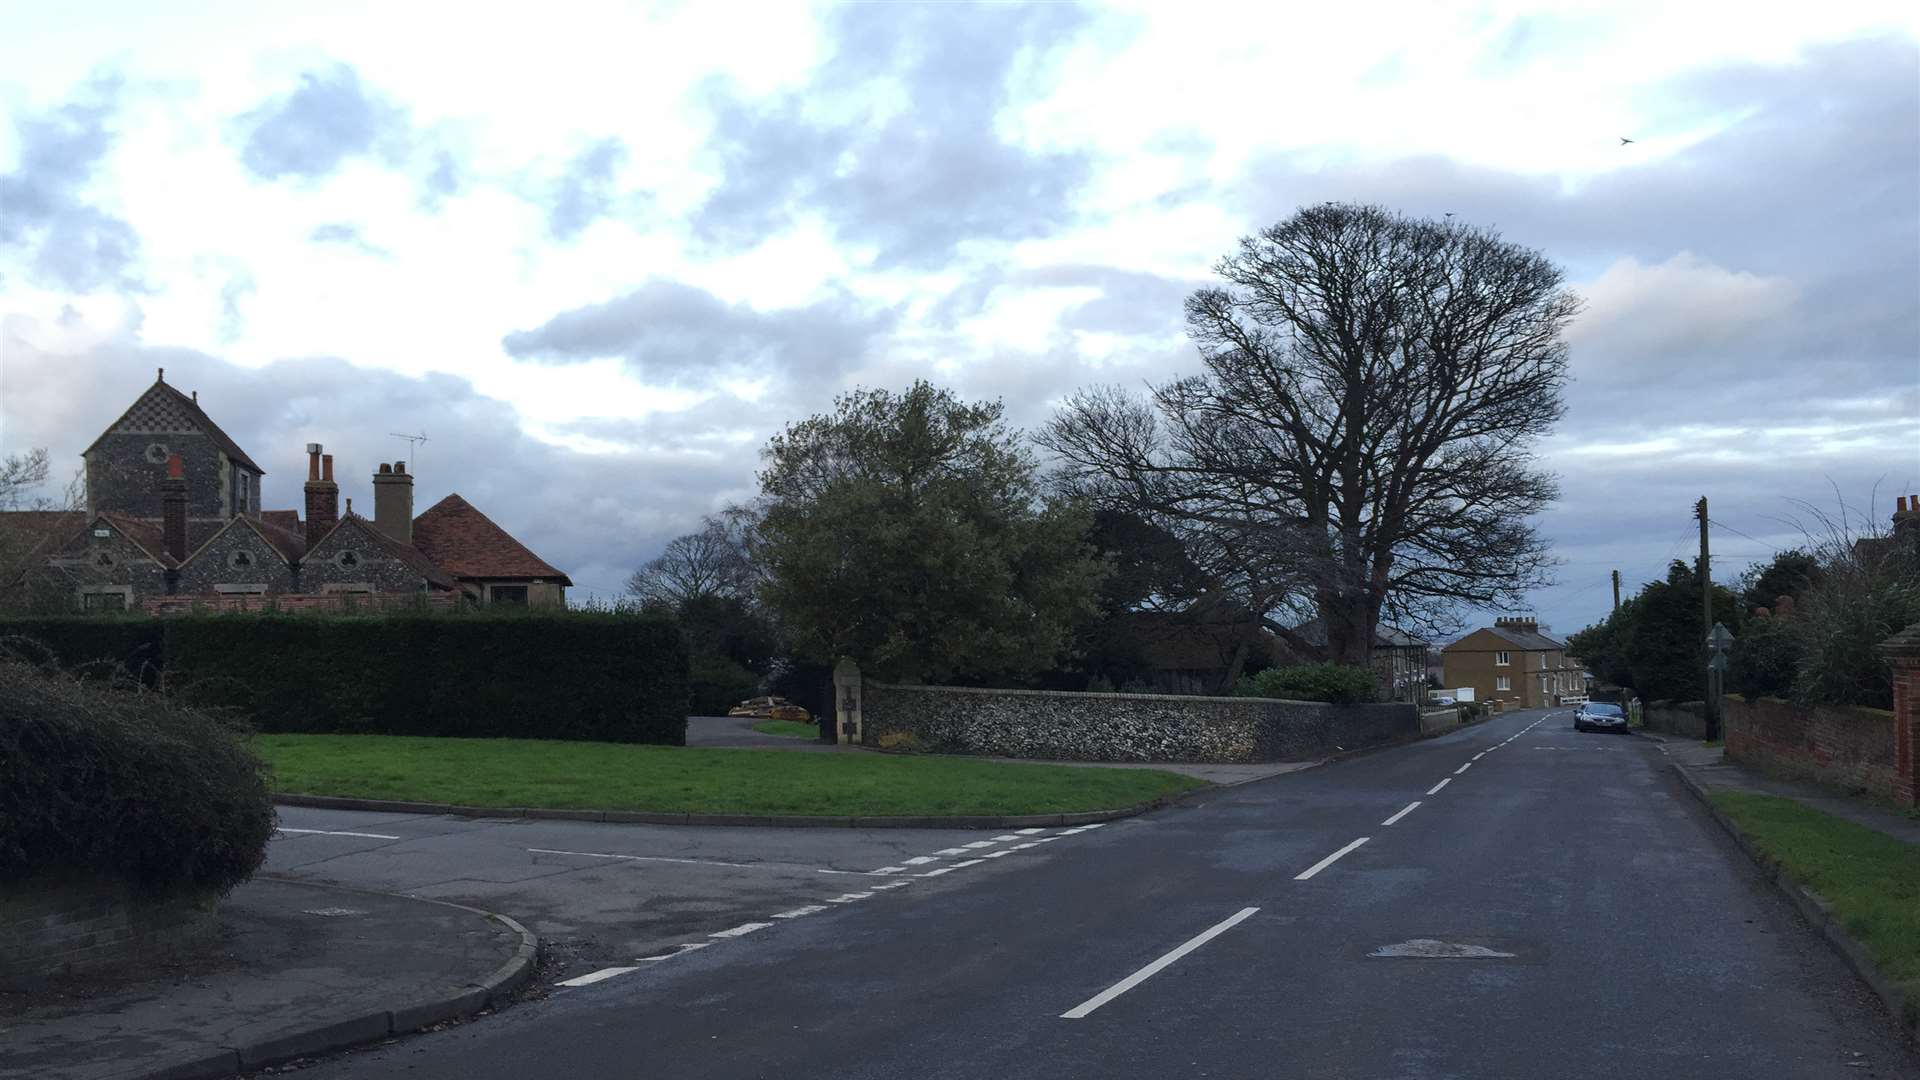 Forge Lane, Shorne, could be destroyed by the new Thames crossing proposals